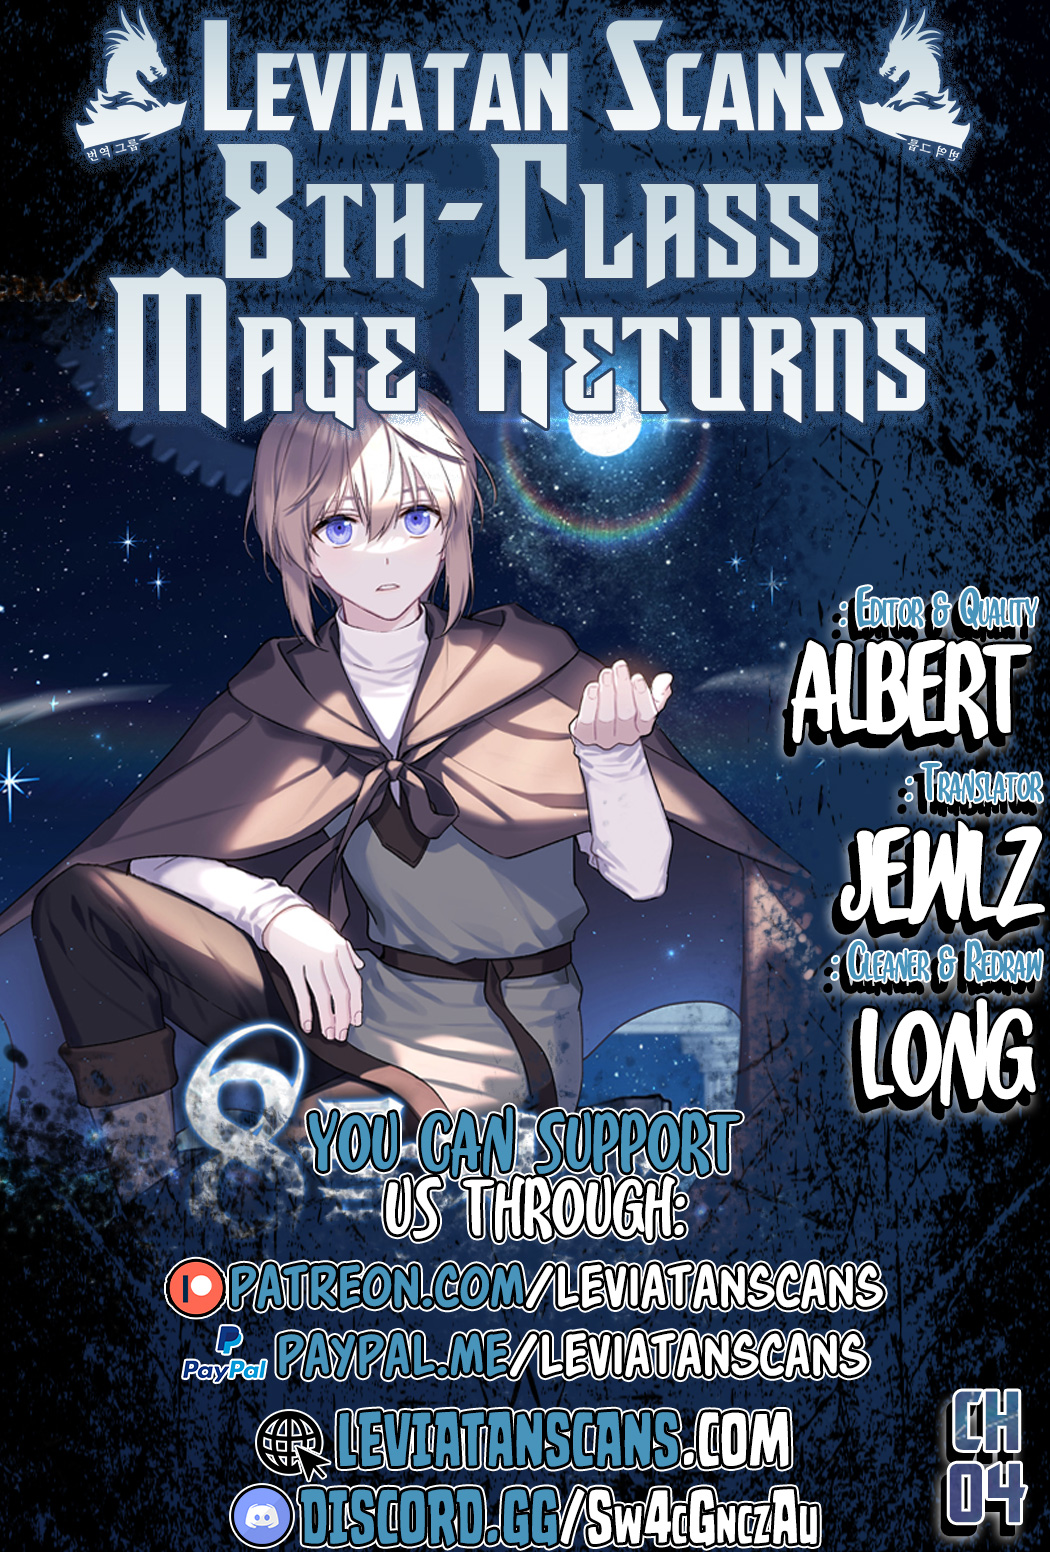 Return of the 8th Class Magician - Chapter 7123 - Image 1